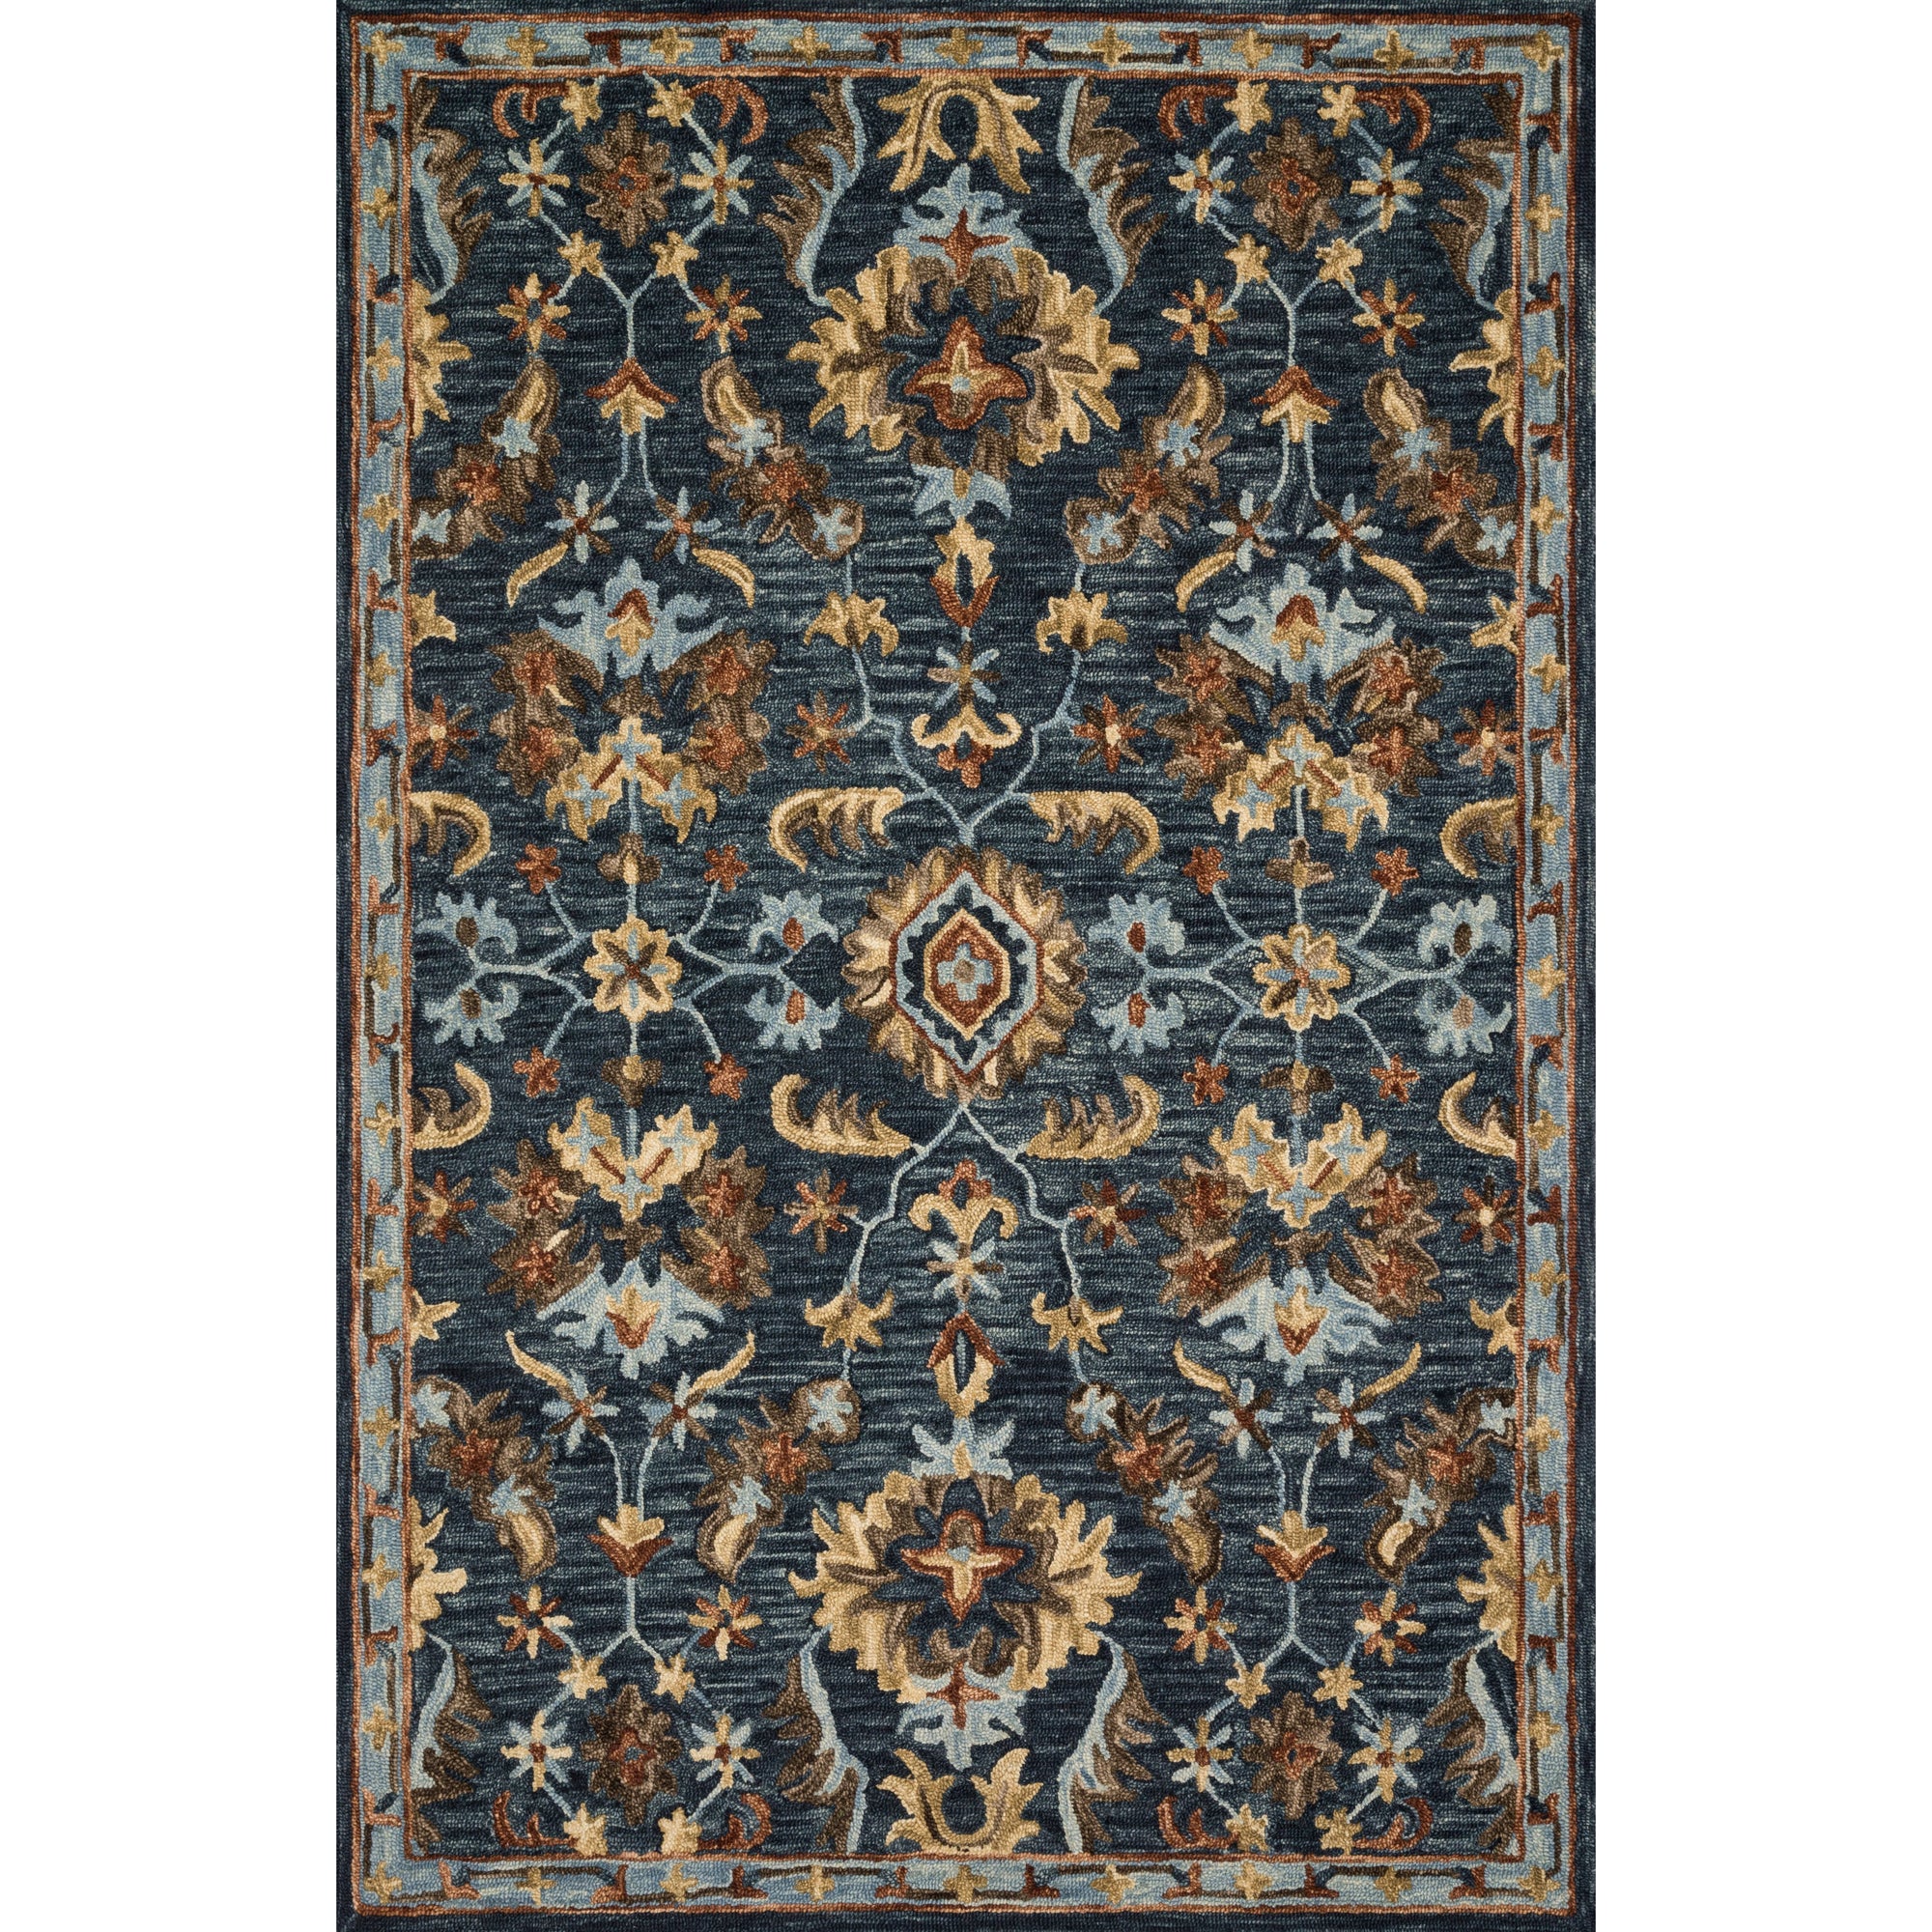 Rugs by Roo Loloi Victoria Denim Multi Area Rug in size 18" x 18" Sample